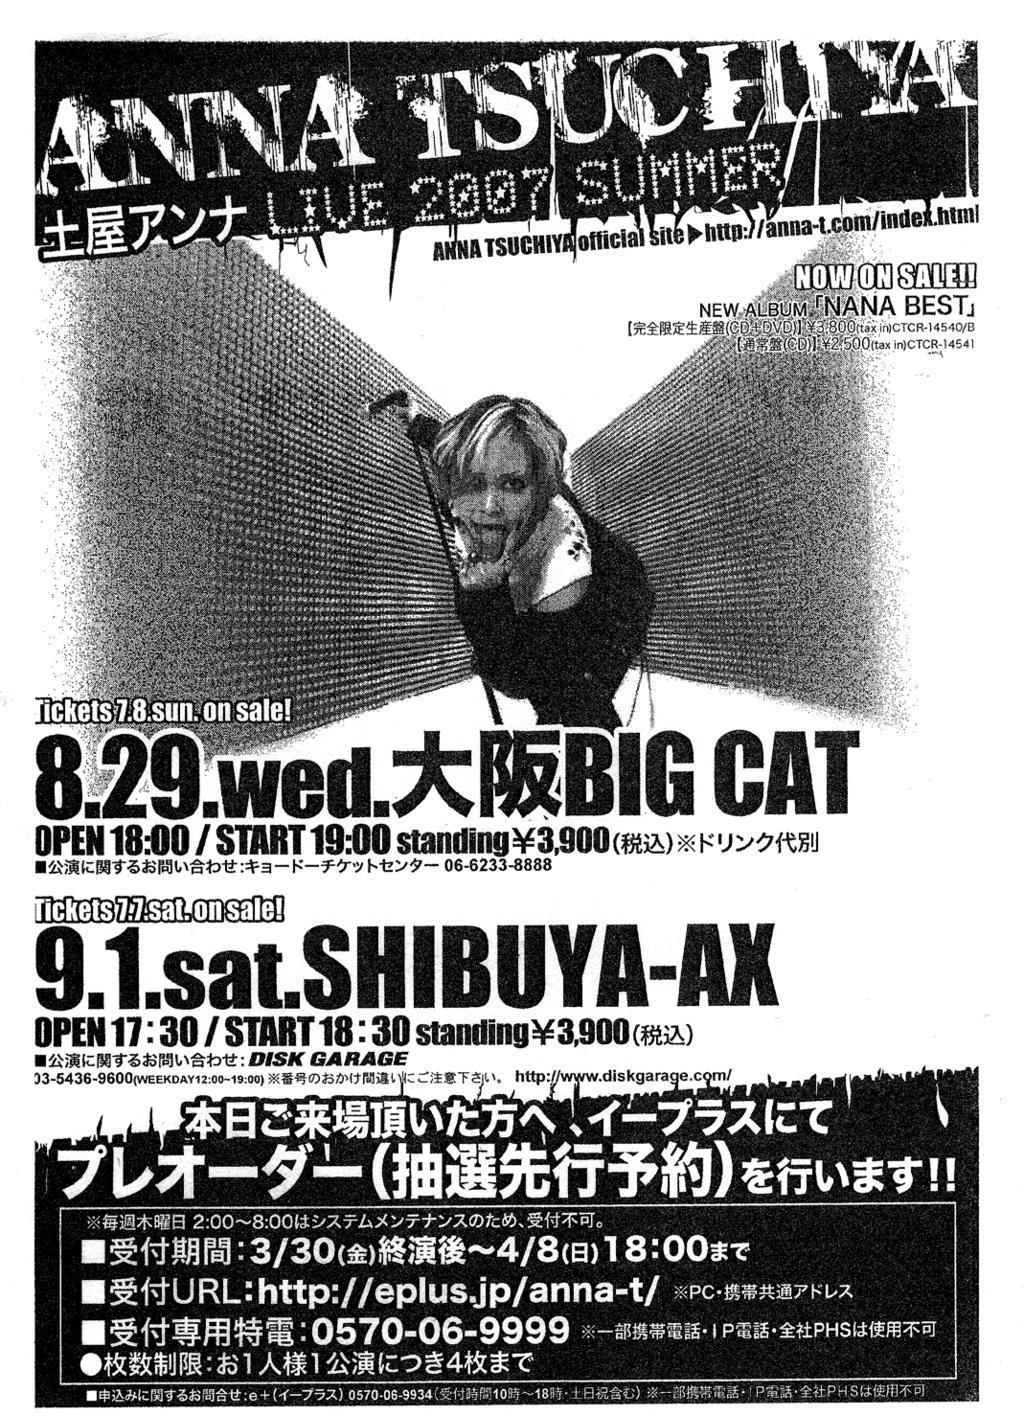 A promotional concert flyer for ANNA